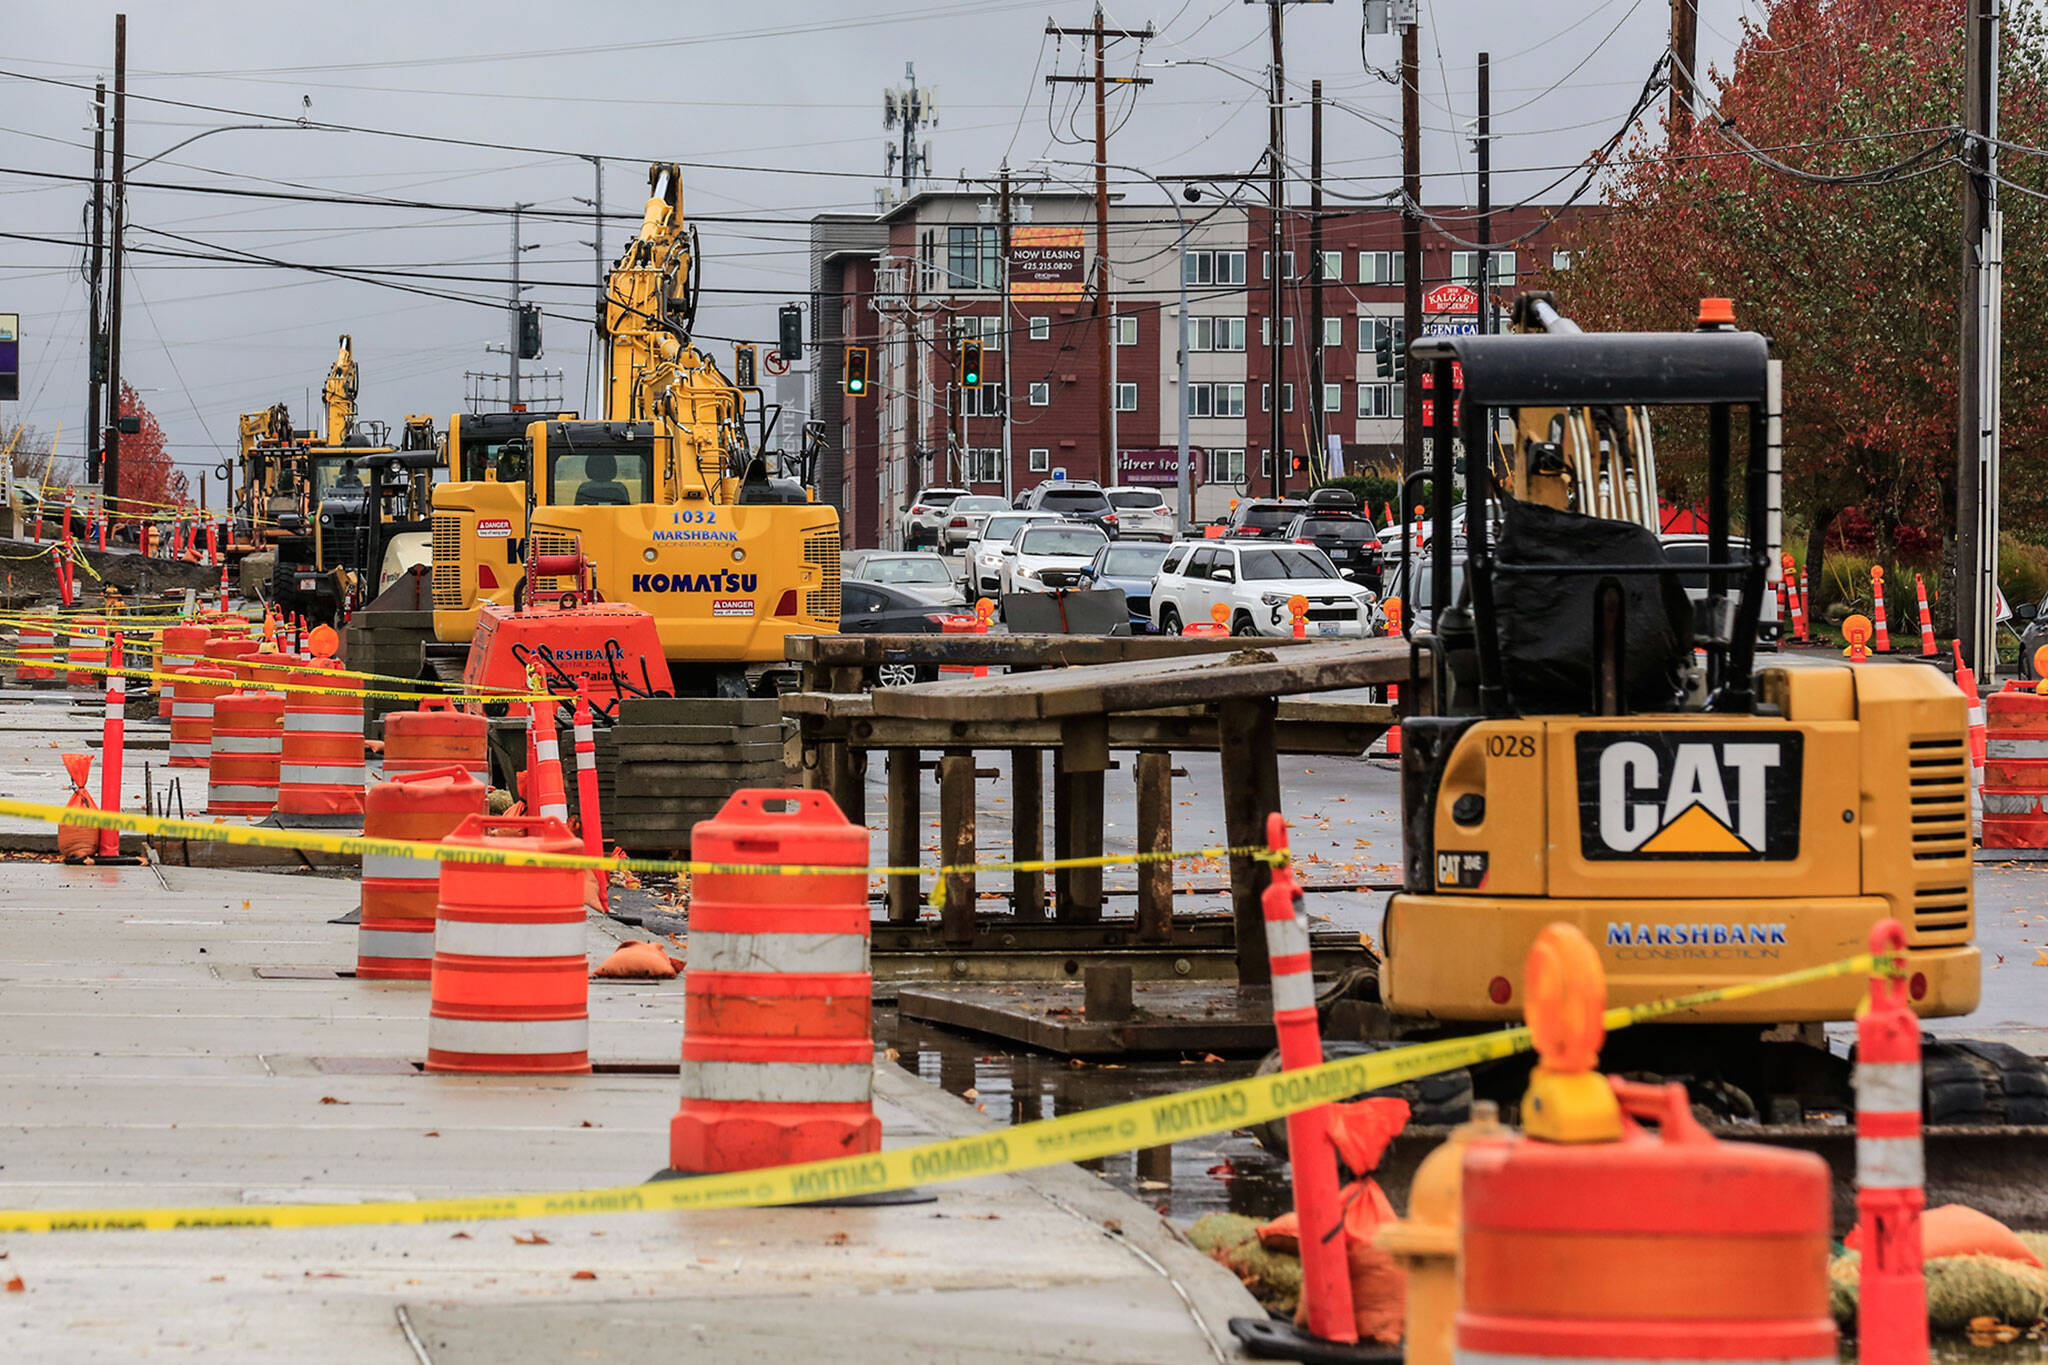 Lynnwood gets about $1 million per year from car-tab fees, which fund preservation, capital projects and street maintenance like this road work along 196th Street SW. (Kevin Clark / Herald file)